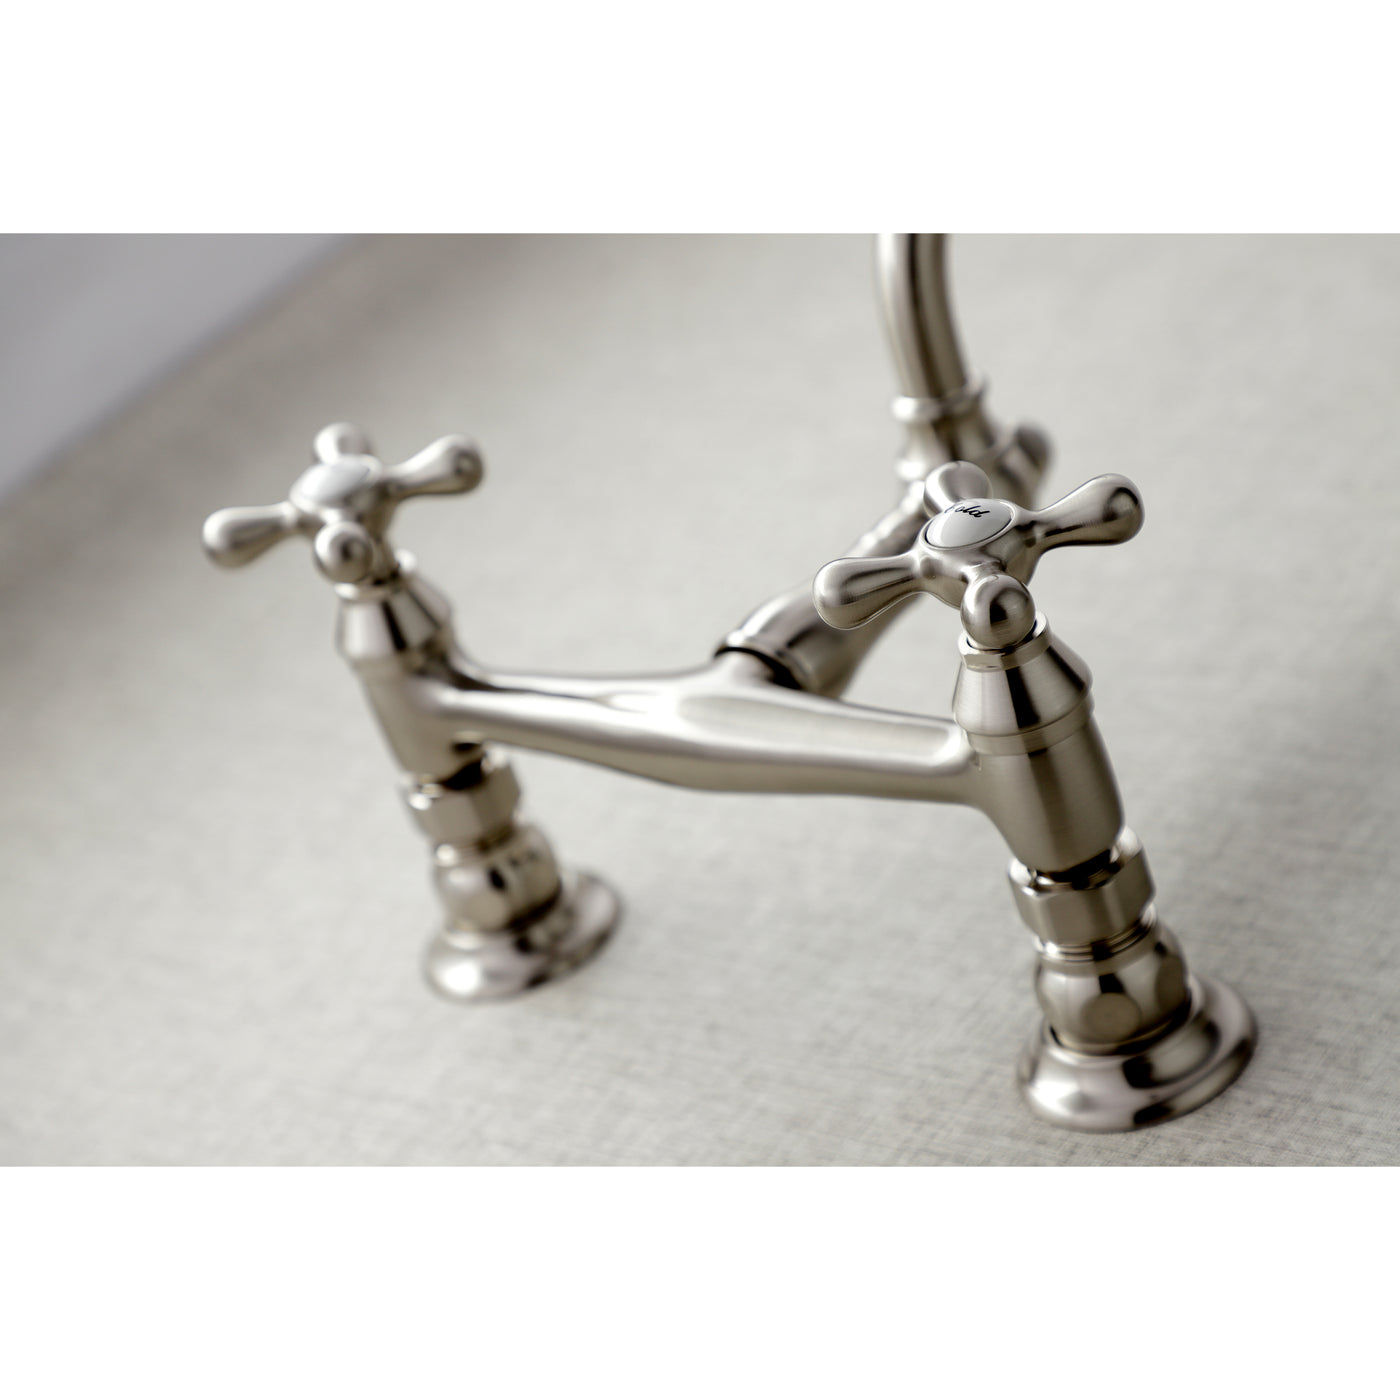 Elements of Design ES3248AX 8-Inch Center Wall Mount Bathroom Faucet, Brushed Nickel